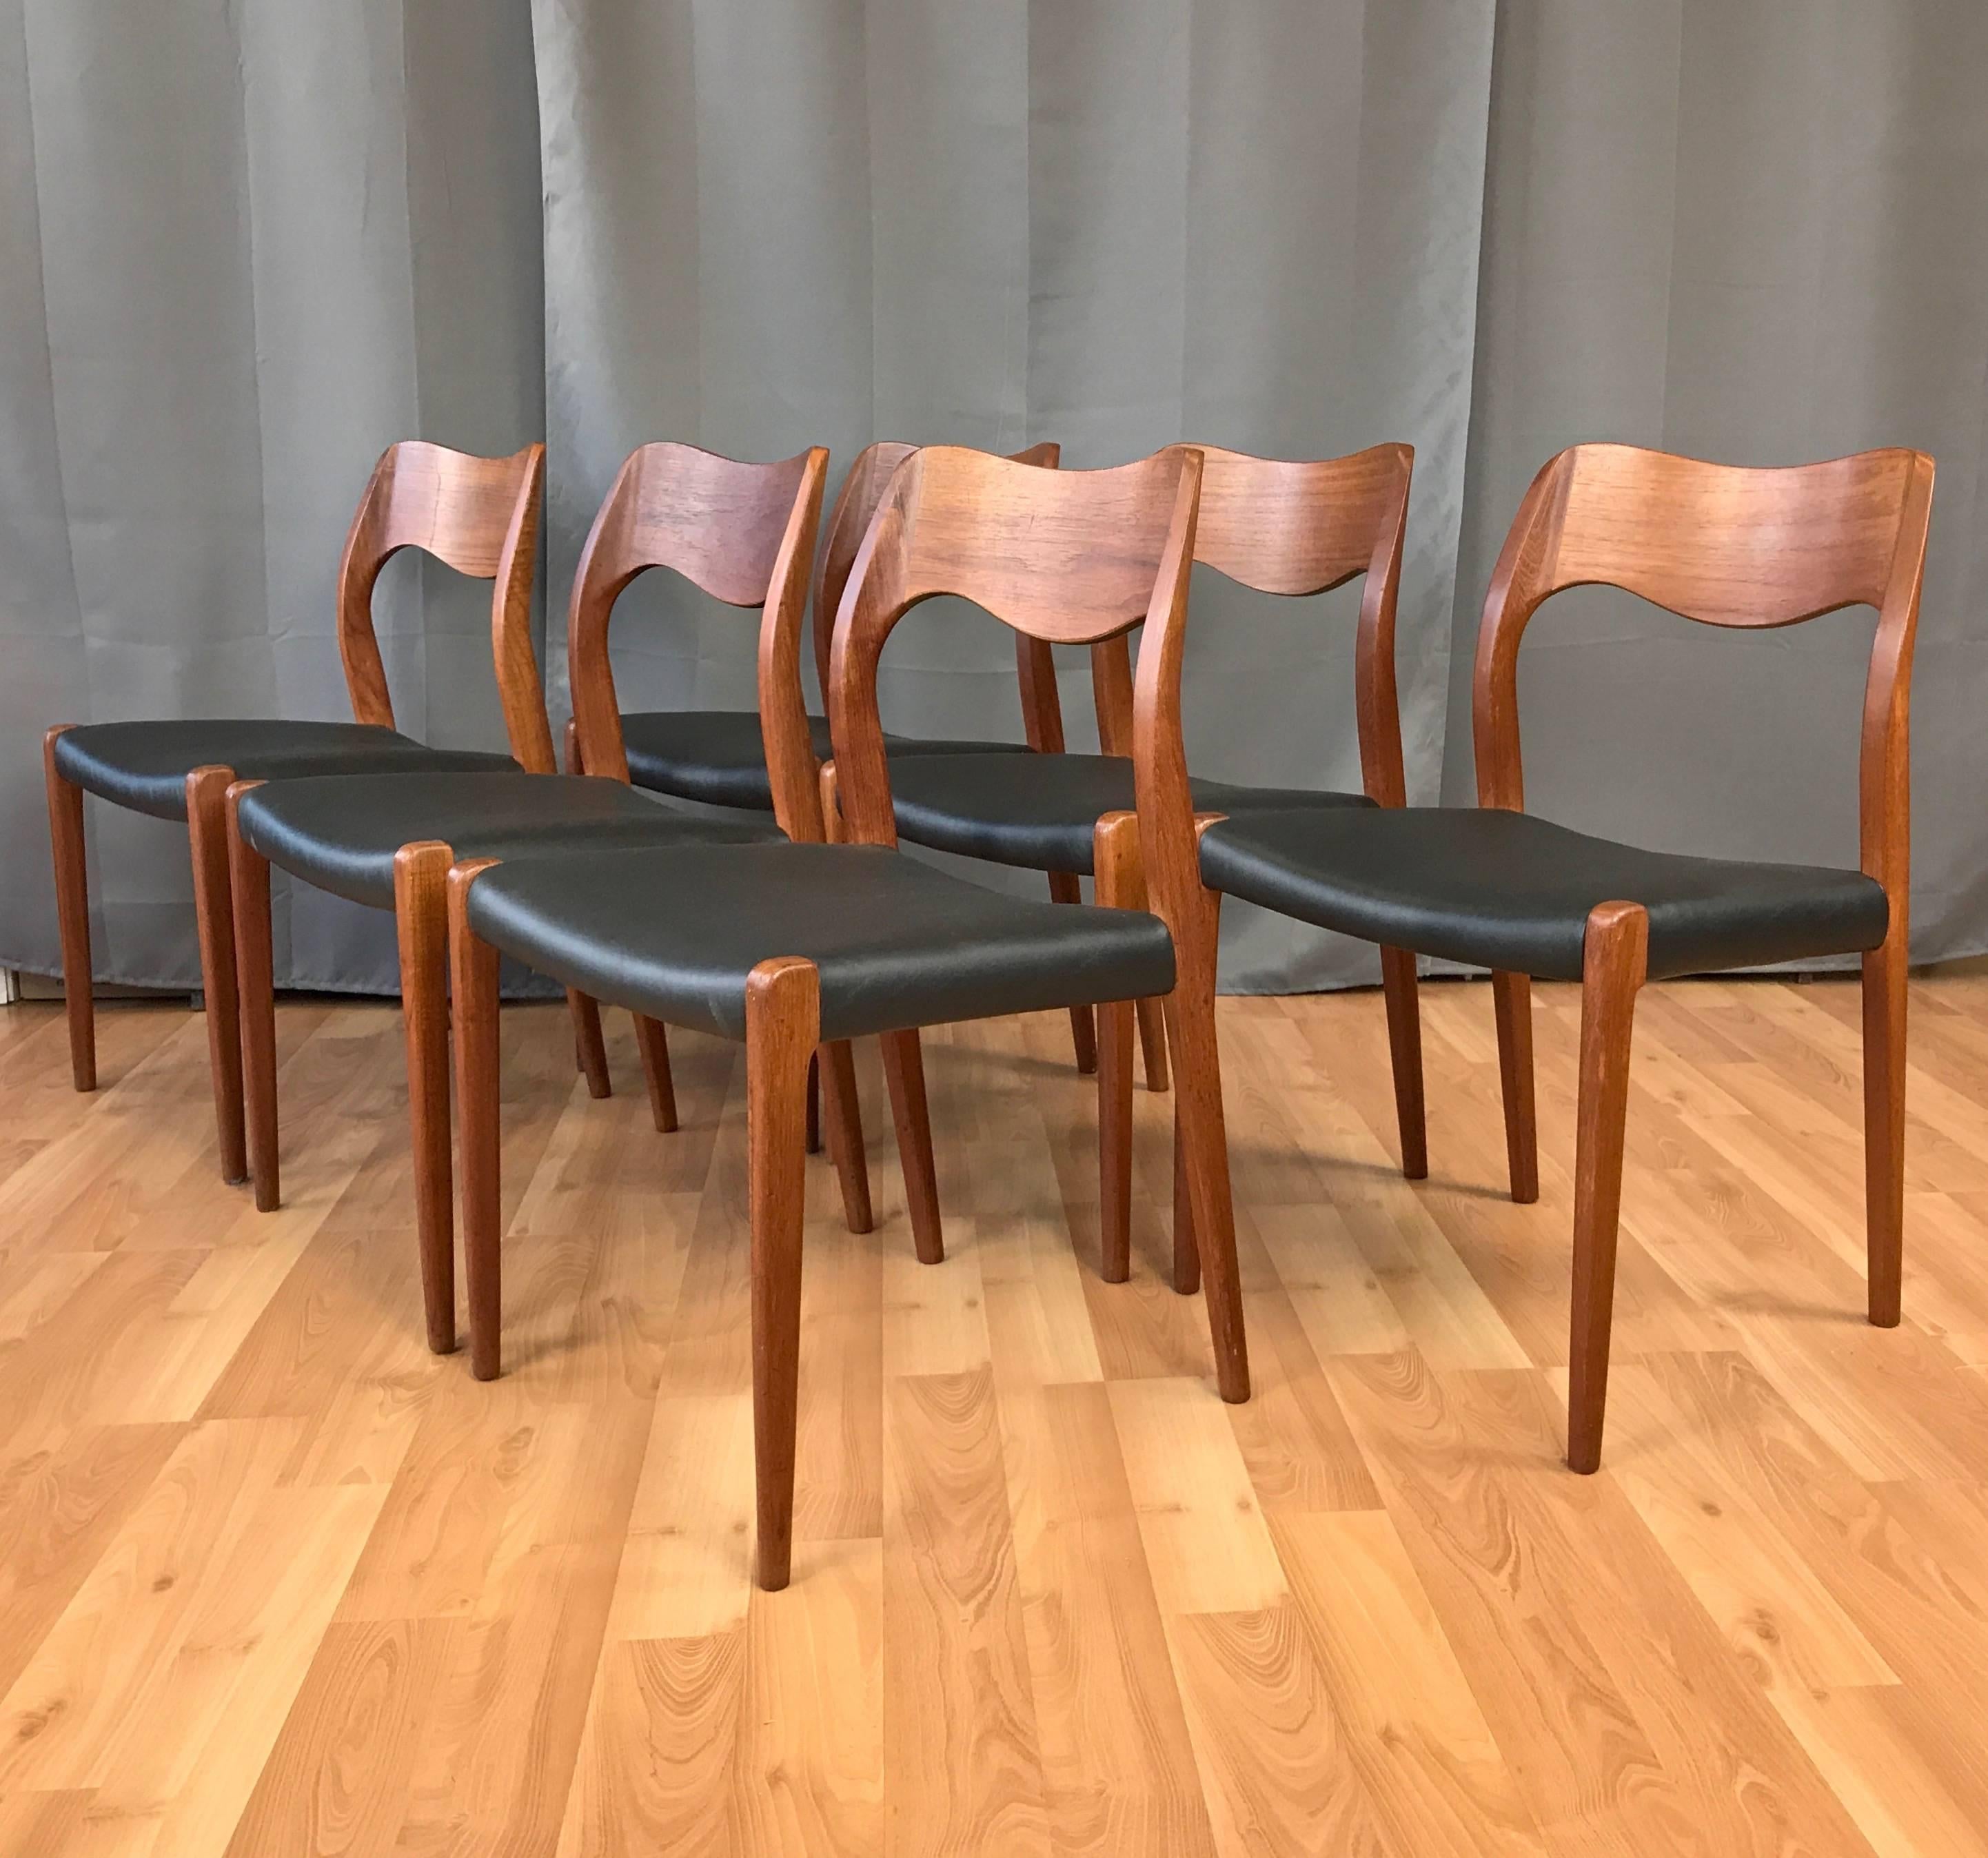 A six-piece set of teak model 71 dining chairs by Niels Otto Møller for J.L. Møllers Møbelfabrik.

A comfortable and classic Danish modern design featuring sculptural solid teak frames newly reupholstered in black faux leather.